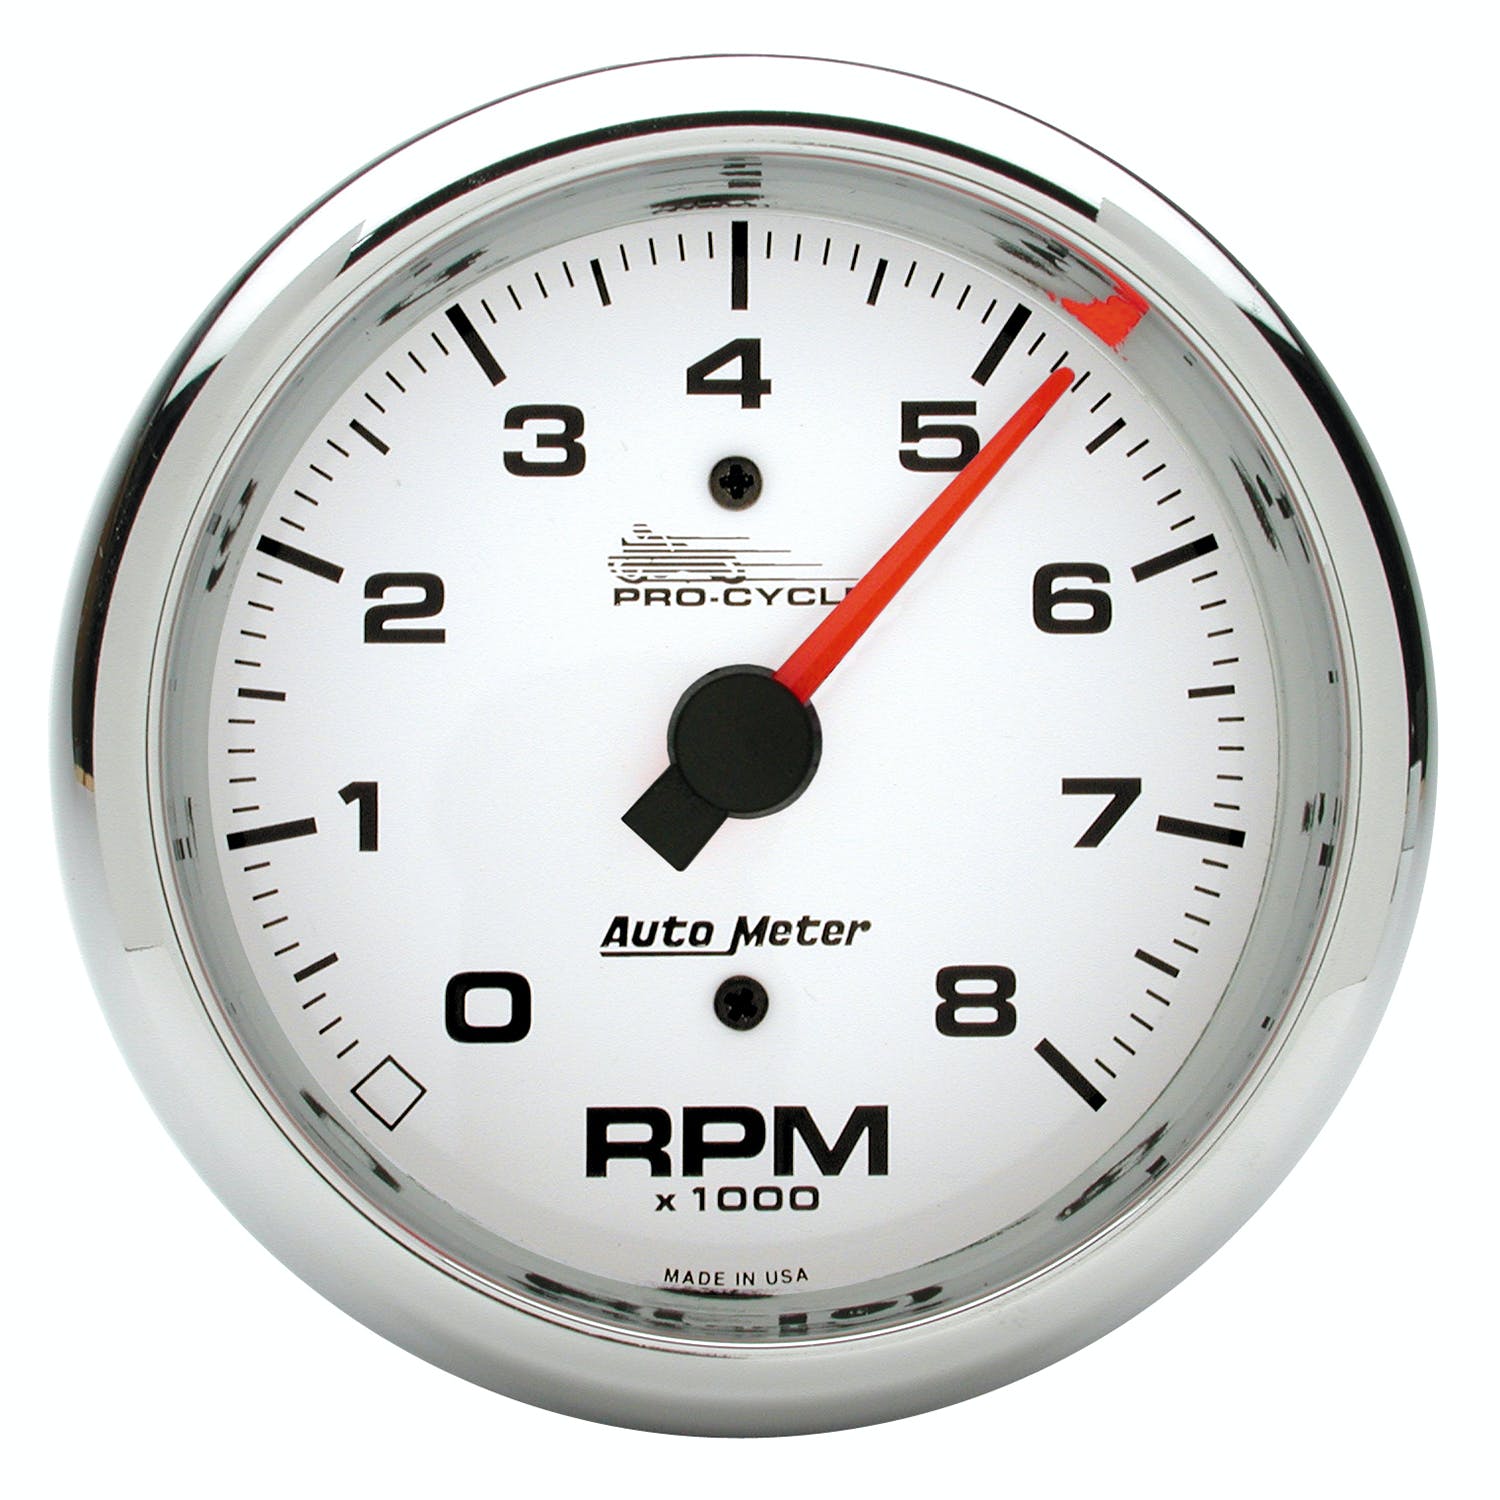 AutoMeter Products 19301 Tachometer Gauge, White-Pro Cycle 3 3/4, 8K RPM, 2and4 Cylinder